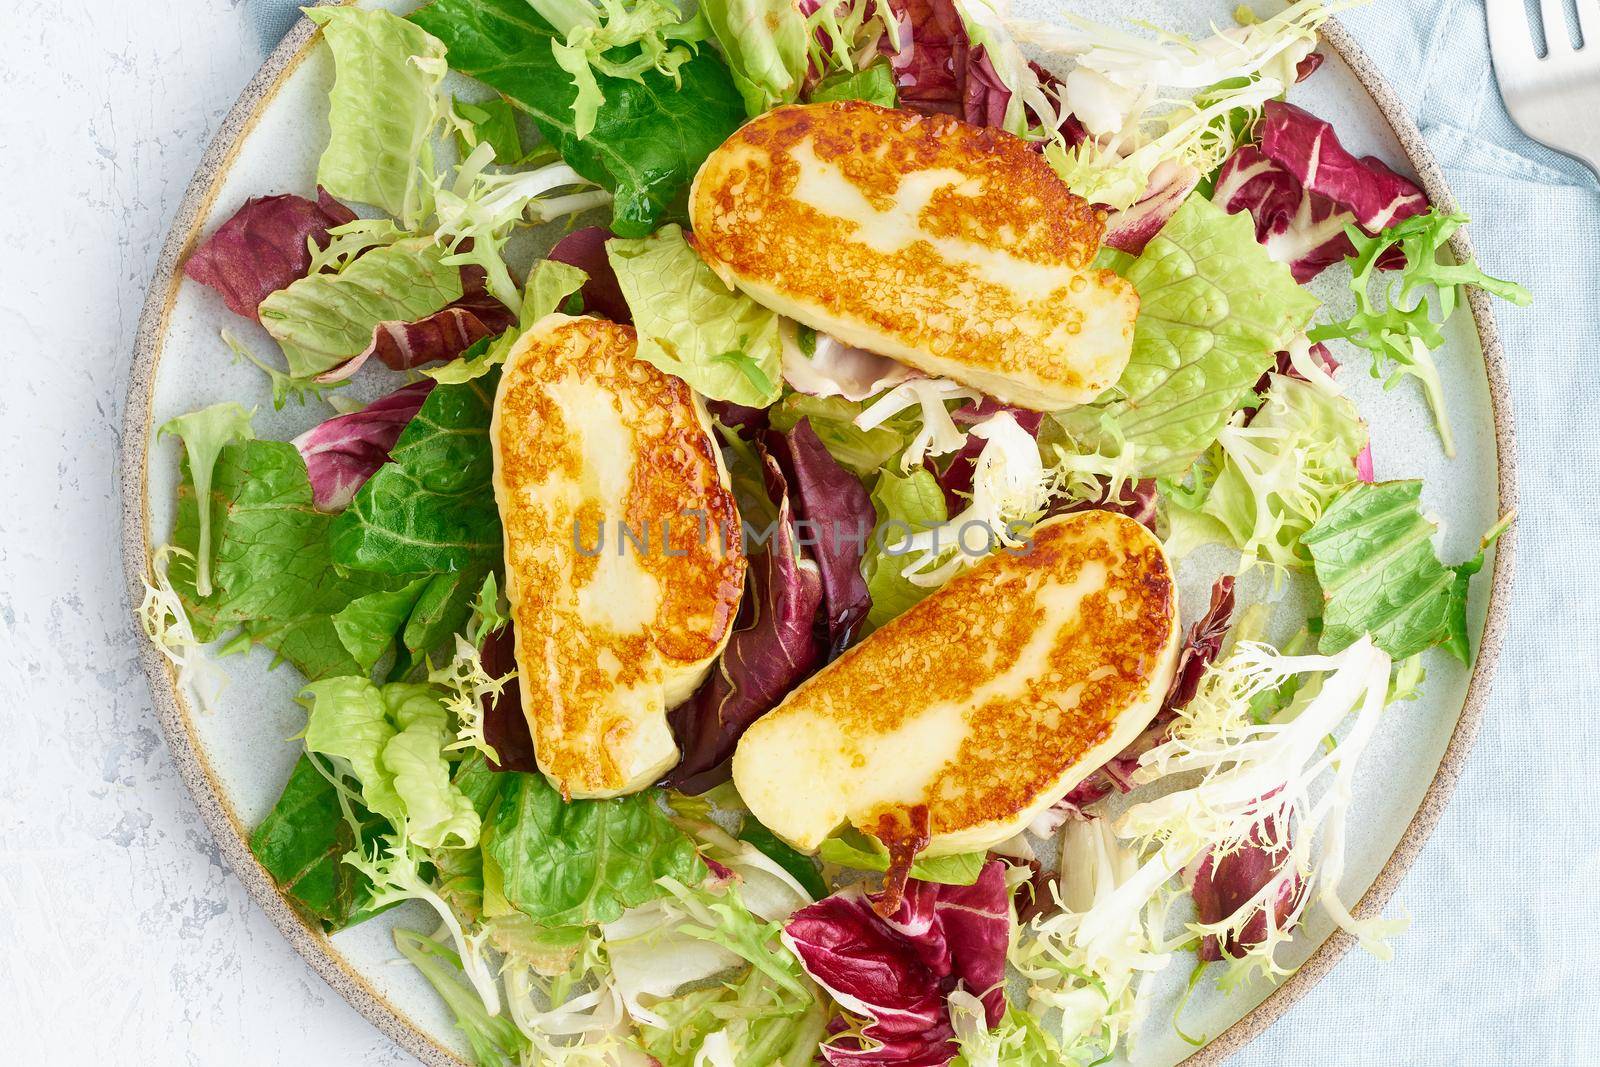 Close up cyprus fried halloumi with healthy salad mix. Lchf, pegan, fodmap, paleo, scd, keto, ketogenic diet. Balanced food, clean eating recipe. Top view, white background, macro